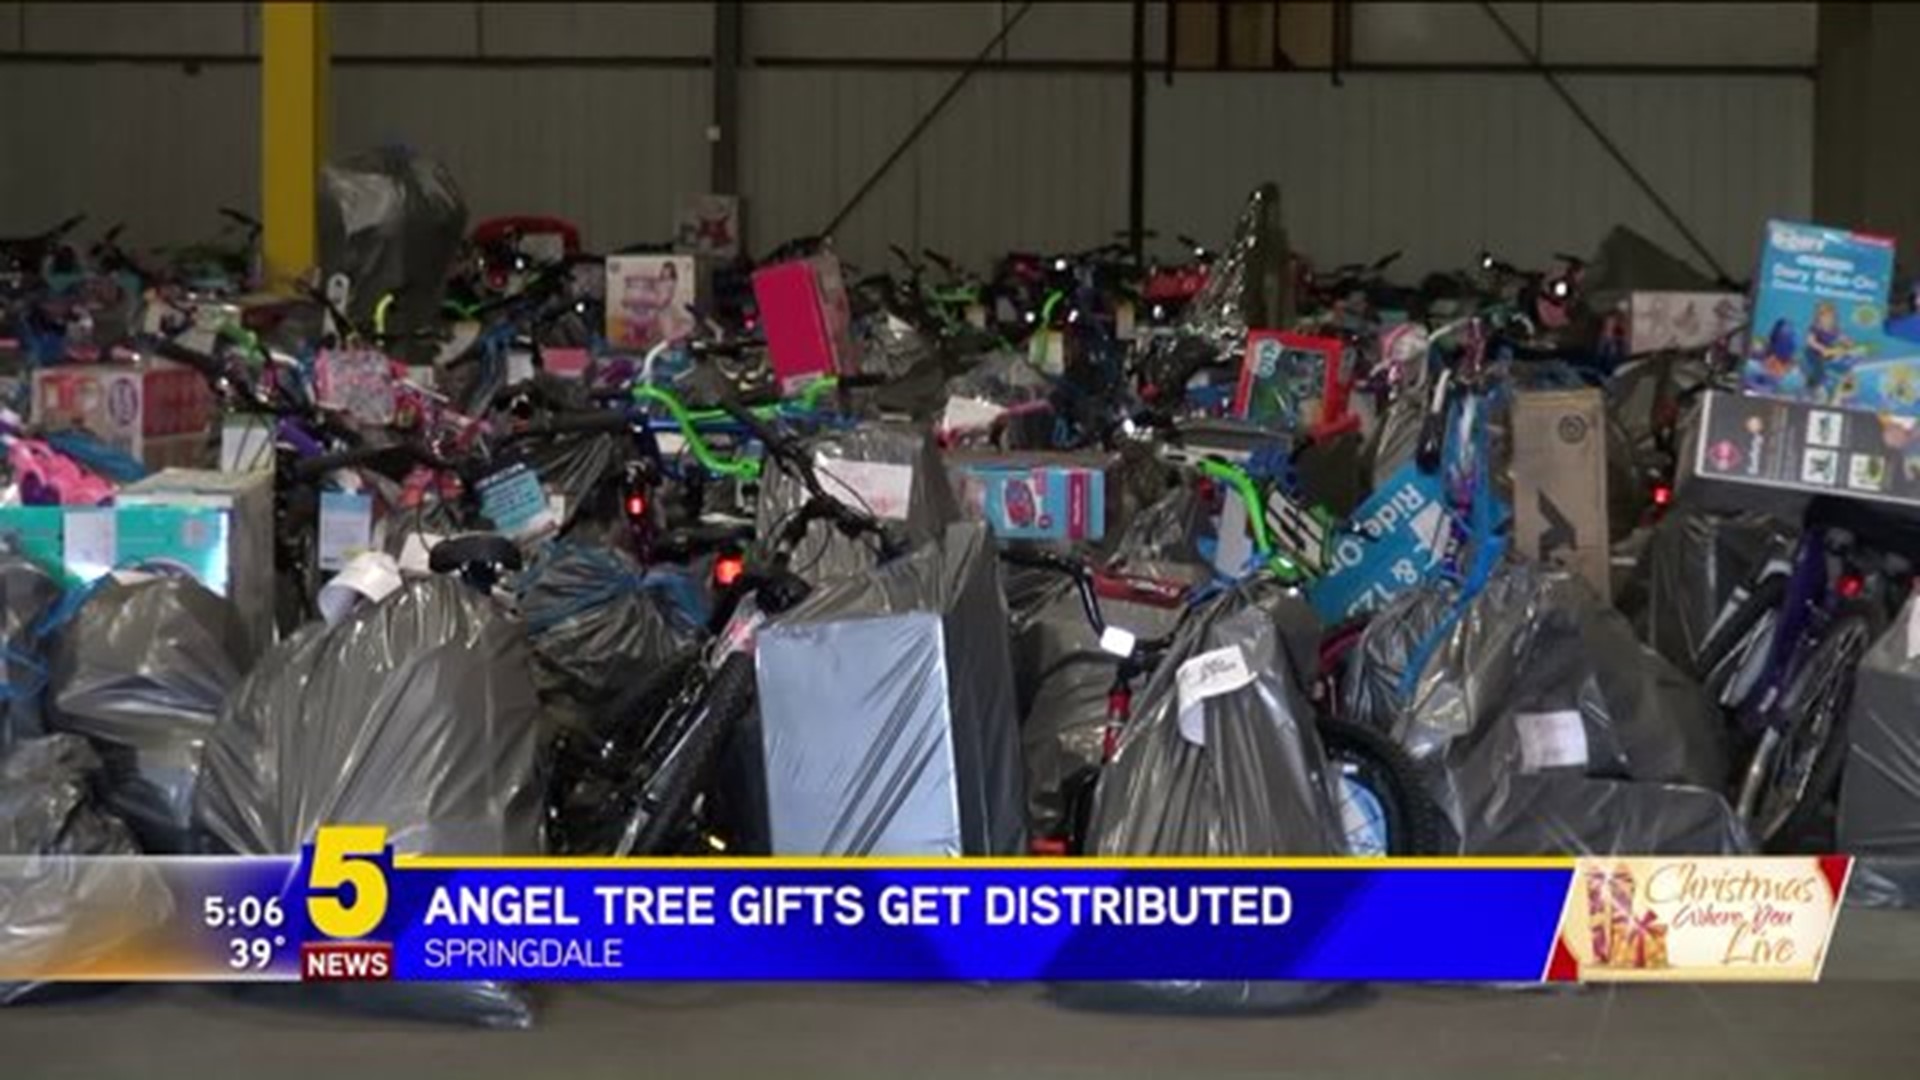 ANGEL TREE GIFTS GET DISTRIBUTES GIFTS